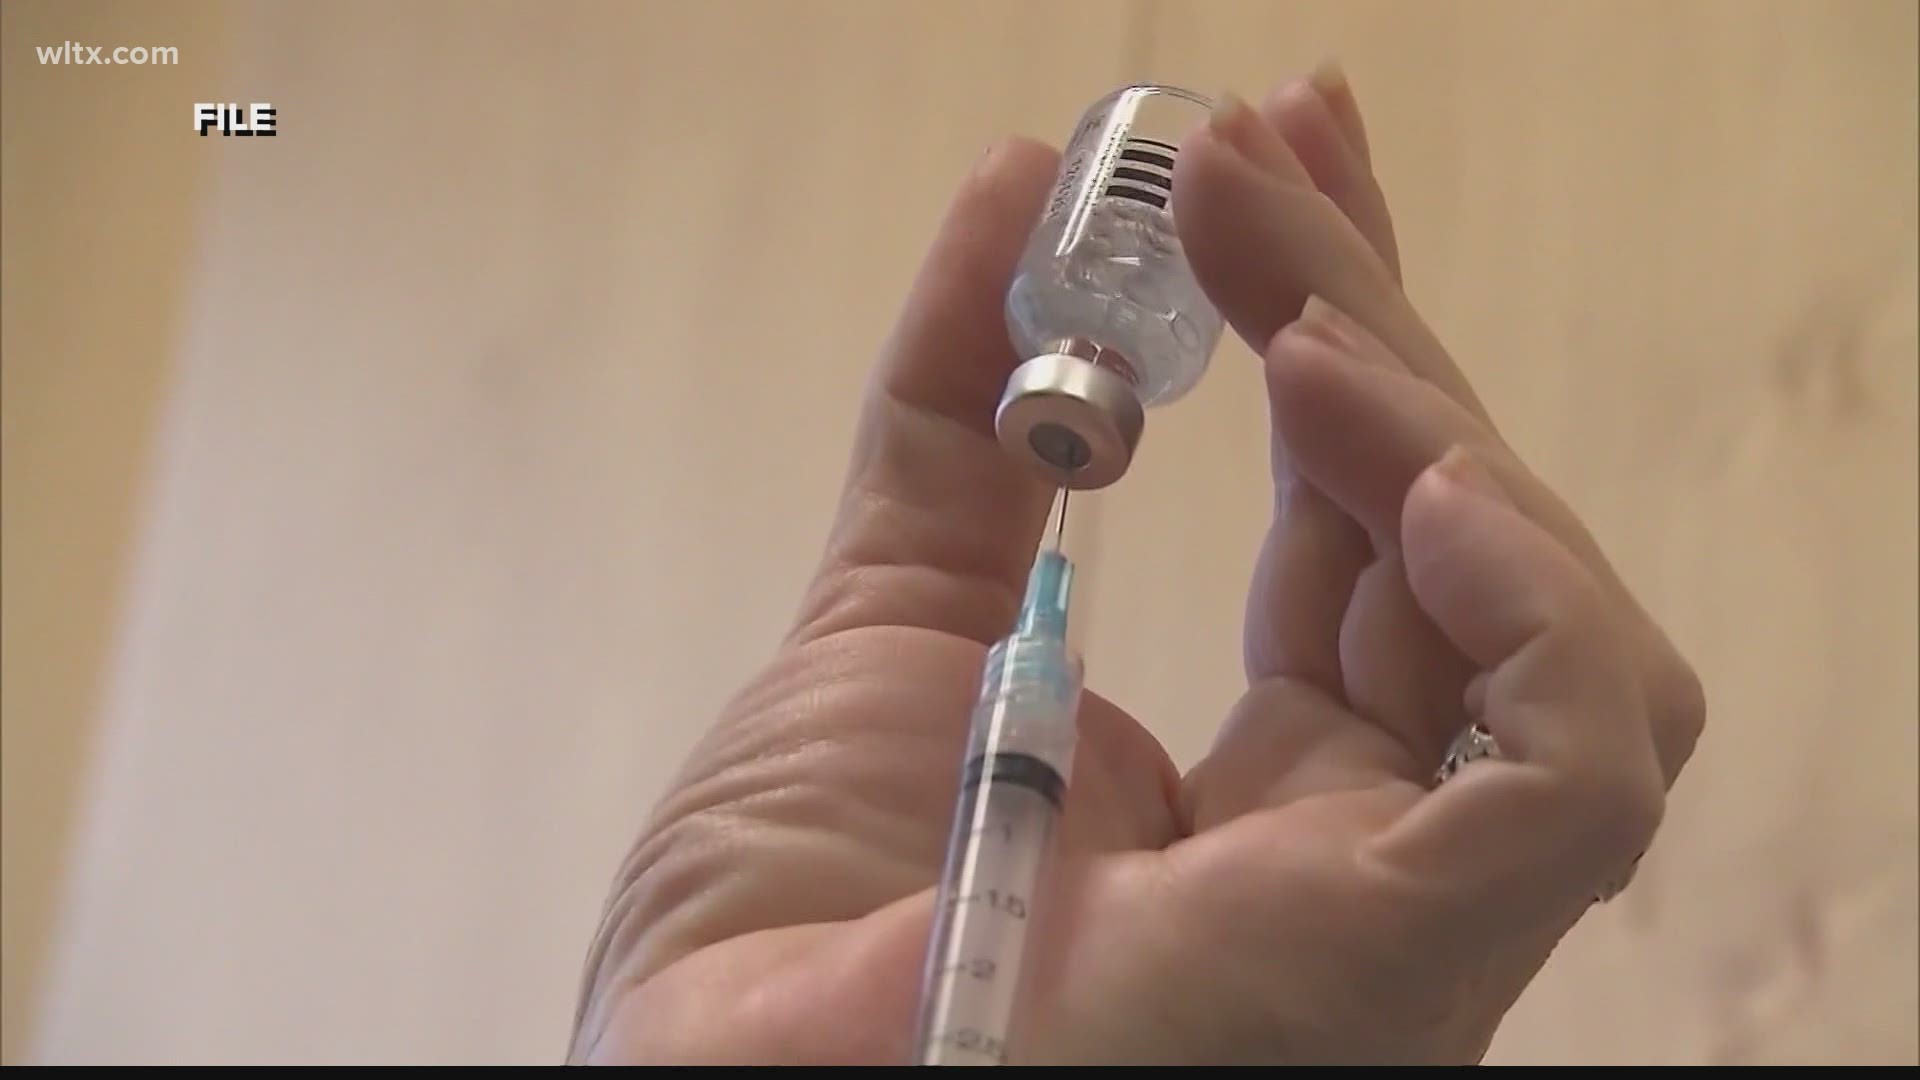 Across the state, health officials are gathering supplies, hoping to build a defense against a flu threat magnified by COVID-19.